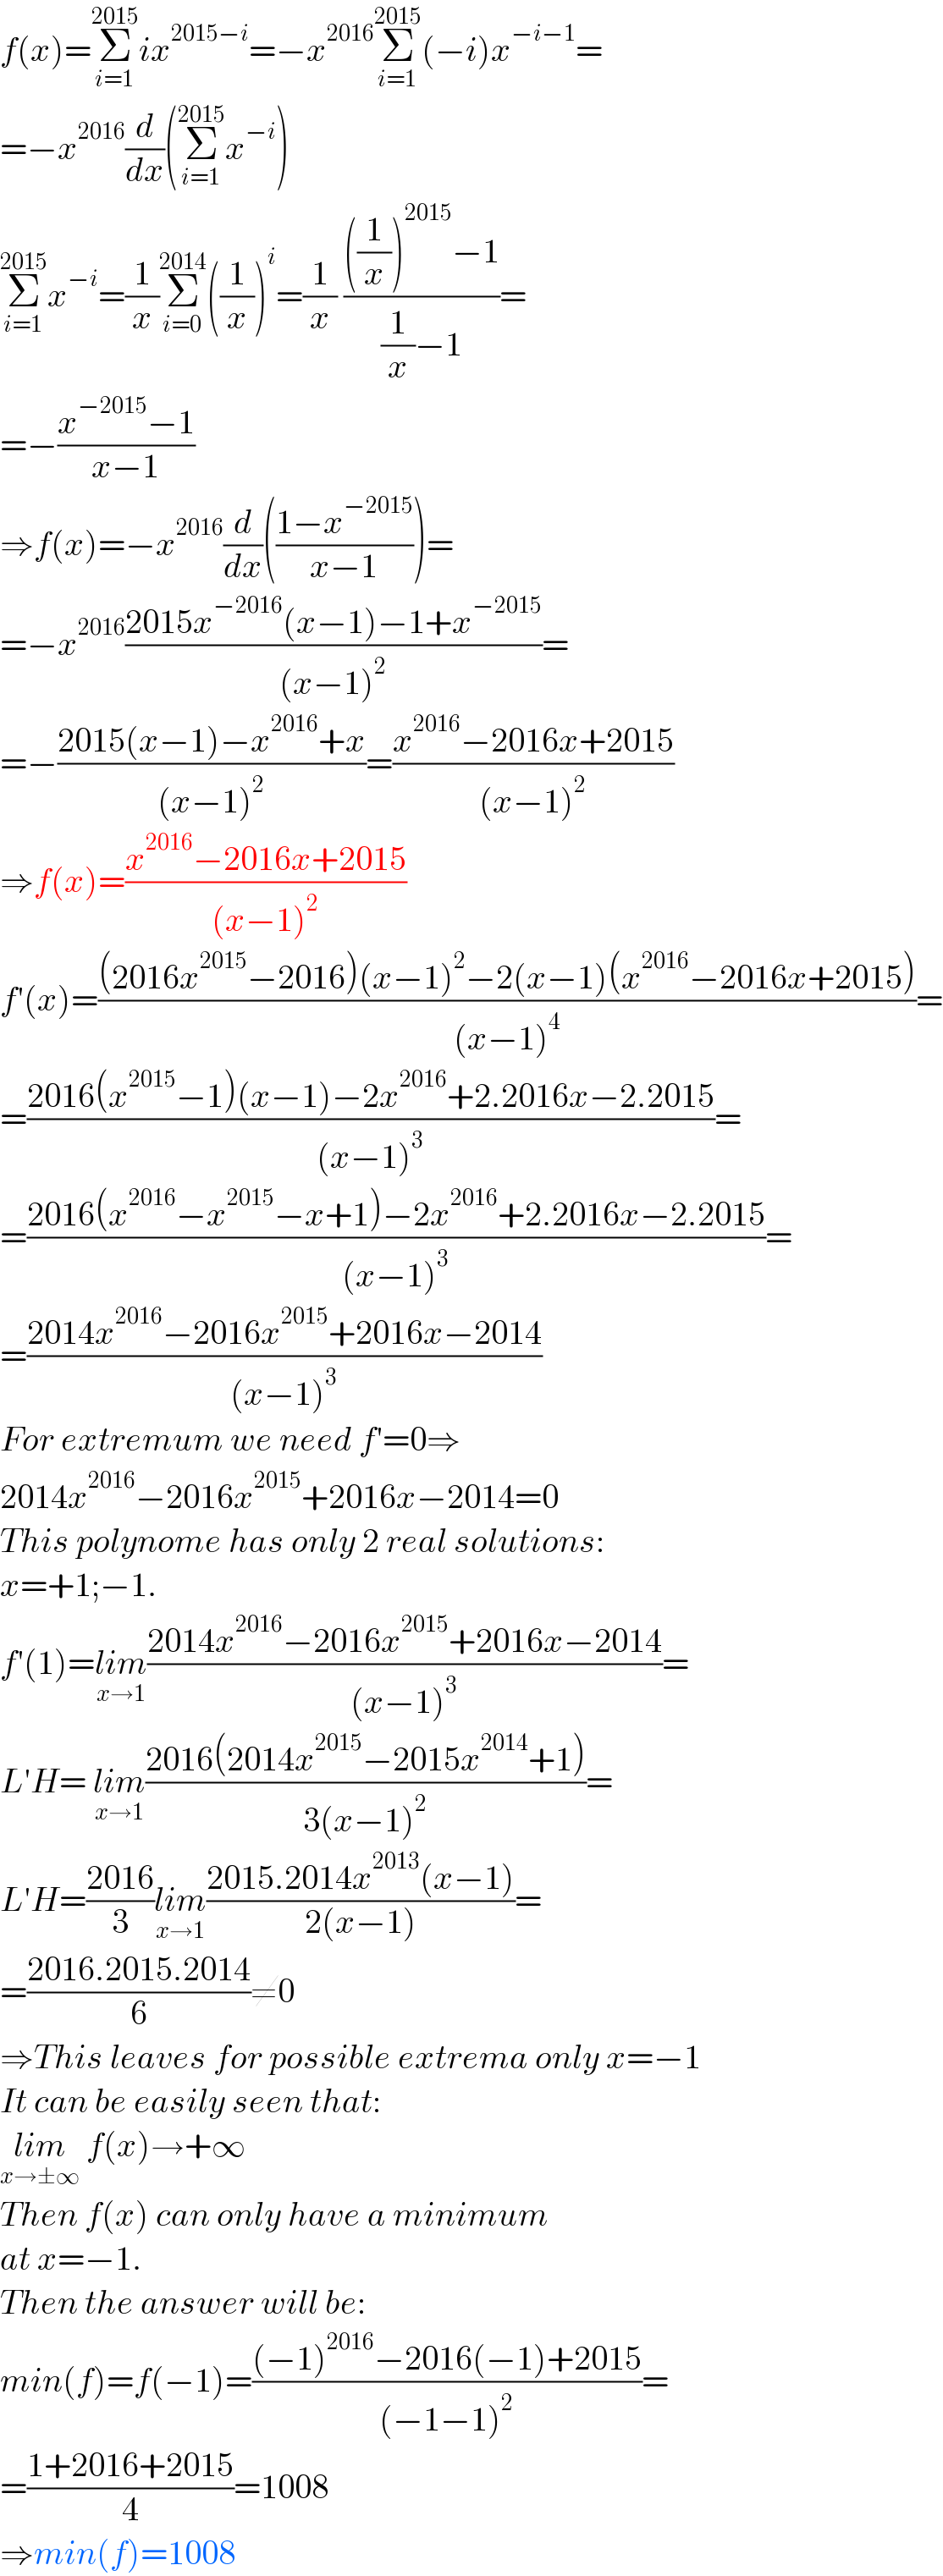 f(x)=Σ_(i=1) ^(2015) ix^(2015−i) =−x^(2016) Σ_(i=1) ^(2015) (−i)x^(−i−1) =  =−x^(2016) (d/dx)(Σ_(i=1) ^(2015) x^(−i) )  Σ_(i=1) ^(2015) x^(−i) =(1/x)Σ_(i=0) ^(2014) ((1/x))^i =(1/x) ((((1/x))^(2015) −1)/((1/x)−1))=  =−((x^(−2015) −1)/(x−1))  ⇒f(x)=−x^(2016) (d/dx)(((1−x^(−2015) )/(x−1)))=  =−x^(2016) ((2015x^(−2016) (x−1)−1+x^(−2015) )/((x−1)^2 ))=  =−((2015(x−1)−x^(2016) +x)/((x−1)^2 ))=((x^(2016) −2016x+2015)/((x−1)^2 ))  ⇒f(x)=((x^(2016) −2016x+2015)/((x−1)^2 ))  f′(x)=(((2016x^(2015) −2016)(x−1)^2 −2(x−1)(x^(2016) −2016x+2015))/((x−1)^4 ))=  =((2016(x^(2015) −1)(x−1)−2x^(2016) +2.2016x−2.2015)/((x−1)^3 ))=  =((2016(x^(2016) −x^(2015) −x+1)−2x^(2016) +2.2016x−2.2015)/((x−1)^3 ))=  =((2014x^(2016) −2016x^(2015) +2016x−2014)/((x−1)^3 ))  For extremum we need f′=0⇒  2014x^(2016) −2016x^(2015) +2016x−2014=0  This polynome has only 2 real solutions:  x=+1;−1.  f′(1)=lim_(x→1) ((2014x^(2016) −2016x^(2015) +2016x−2014)/((x−1)^3 ))=  L′H= lim_(x→1) ((2016(2014x^(2015) −2015x^(2014) +1))/(3(x−1)^2 ))=  L′H=((2016)/3)lim_(x→1) ((2015.2014x^(2013) (x−1))/(2(x−1)))=  =((2016.2015.2014)/6)≠0  ⇒This leaves for possible extrema only x=−1  It can be easily seen that:  lim_(x→±∞)  f(x)→+∞  Then f(x) can only have a minimum  at x=−1.  Then the answer will be:  min(f)=f(−1)=(((−1)^(2016) −2016(−1)+2015)/((−1−1)^2 ))=  =((1+2016+2015)/4)=1008  ⇒min(f)=1008   